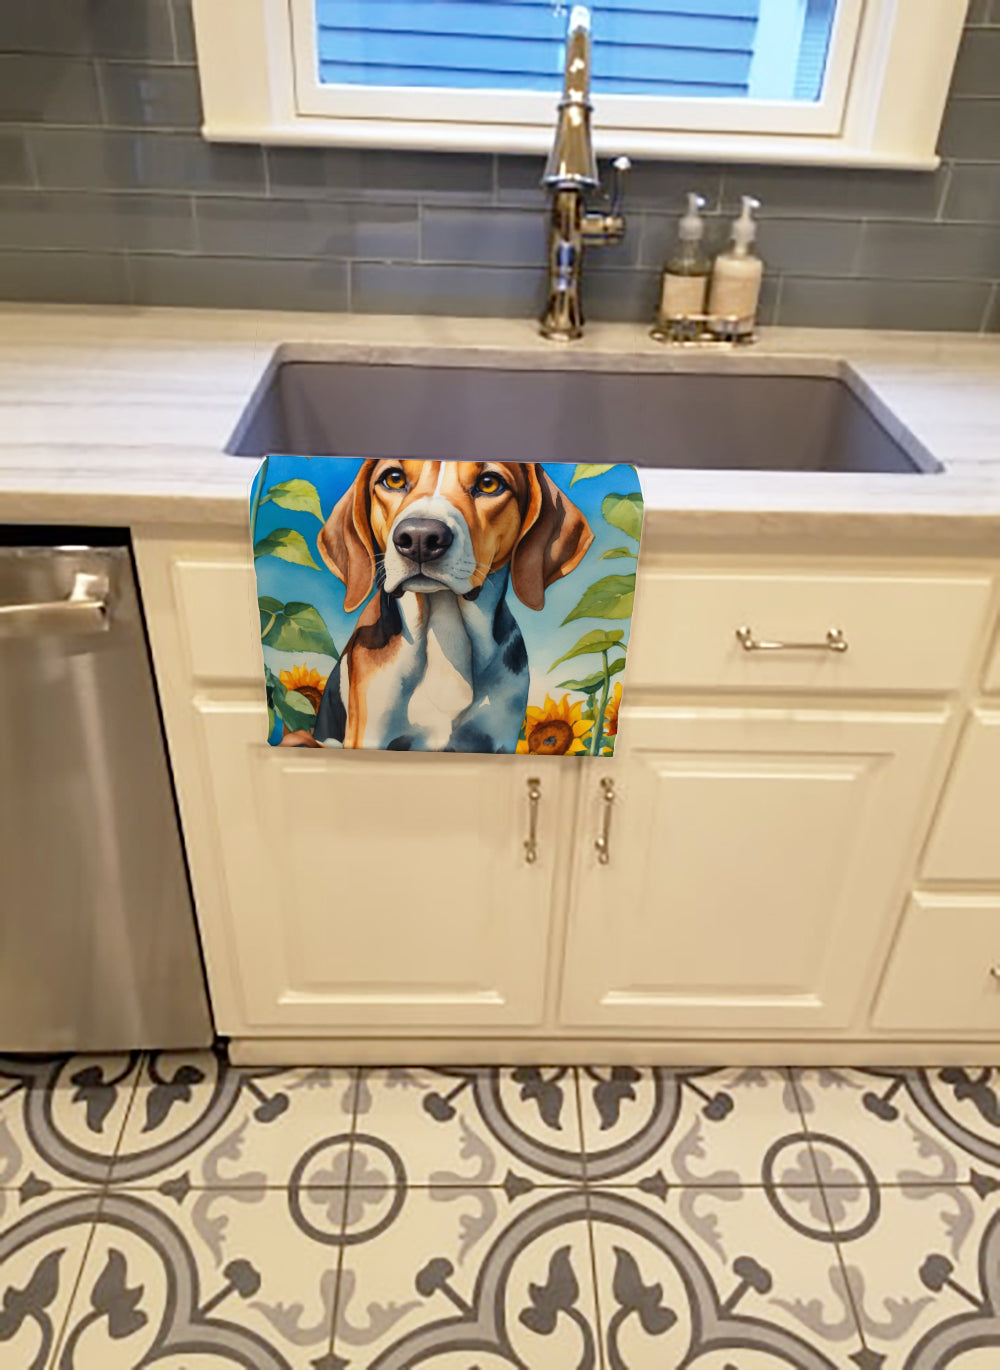 Buy this American Foxhound in Sunflowers Kitchen Towel